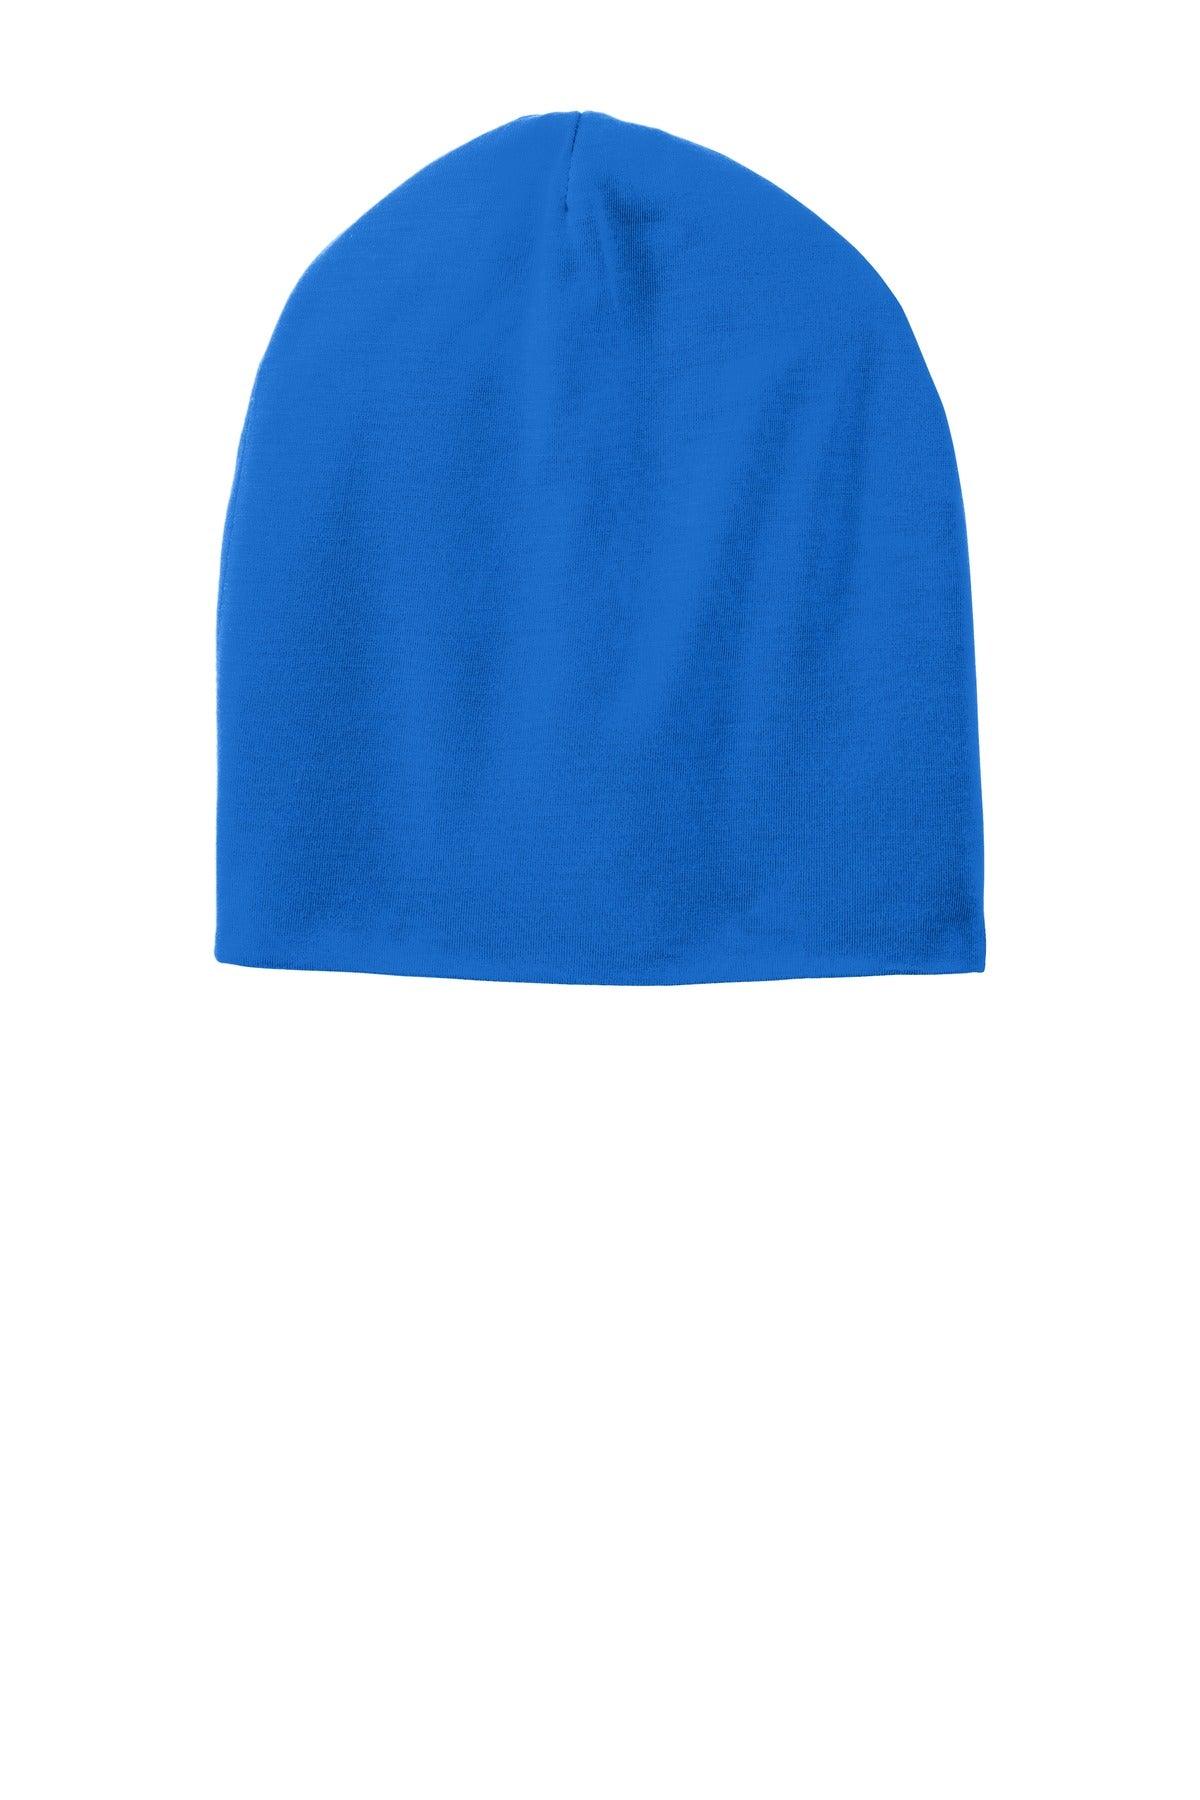 Sport-Tek PosiCharge Competitor Cotton Touch Jersey Knit Slouch Beanie. STC35 - Dresses Max